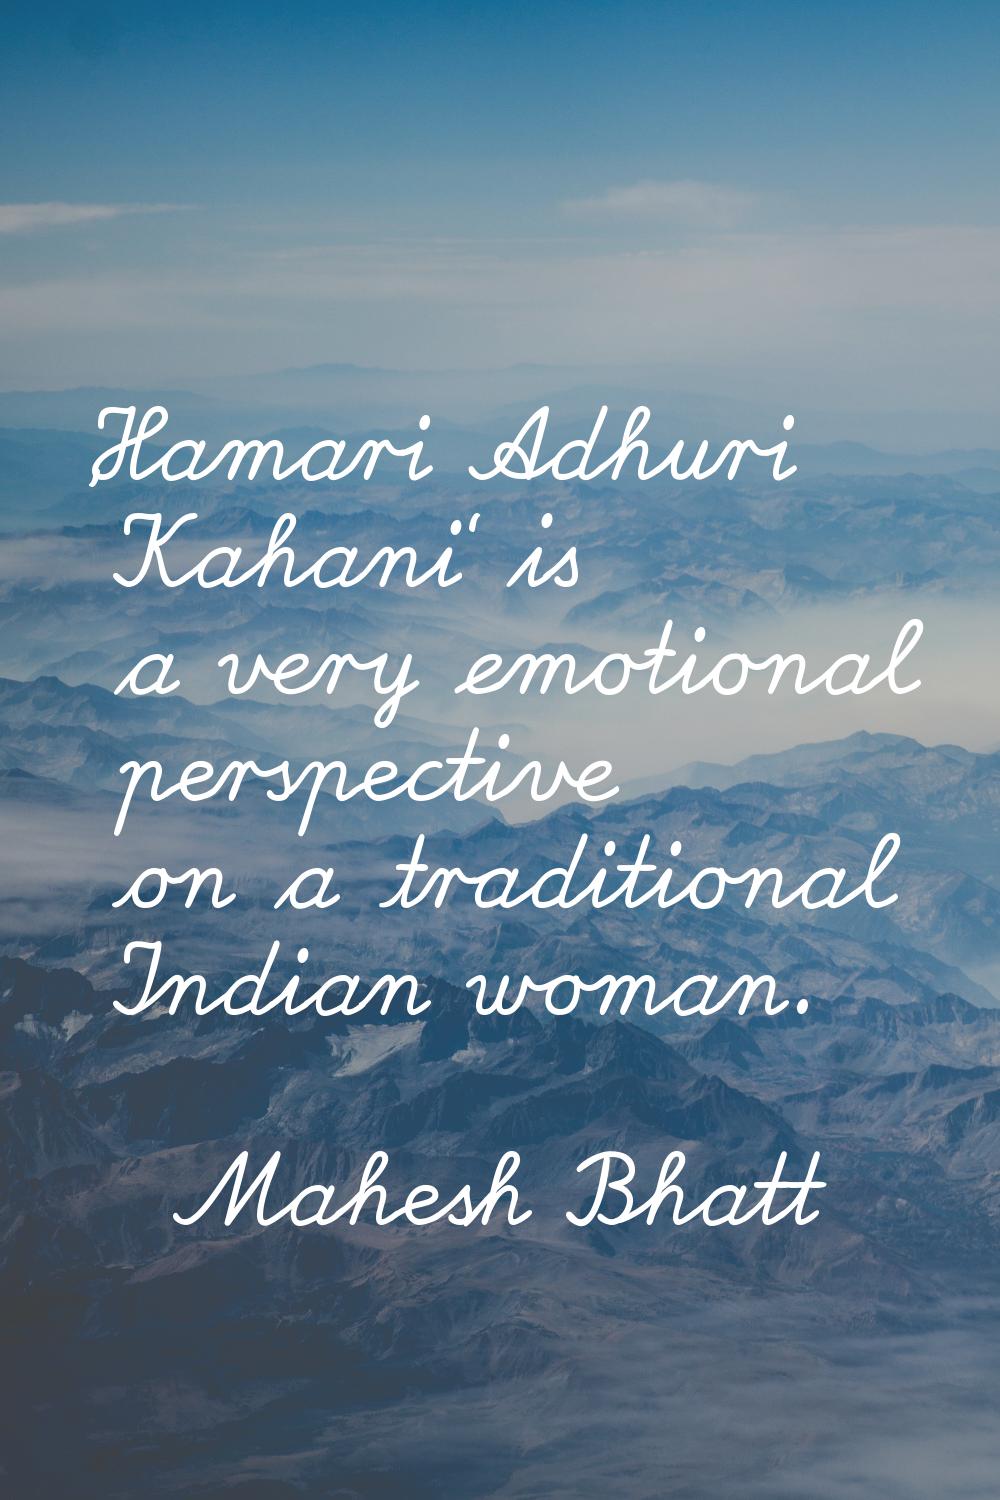 'Hamari Adhuri Kahani' is a very emotional perspective on a traditional Indian woman.